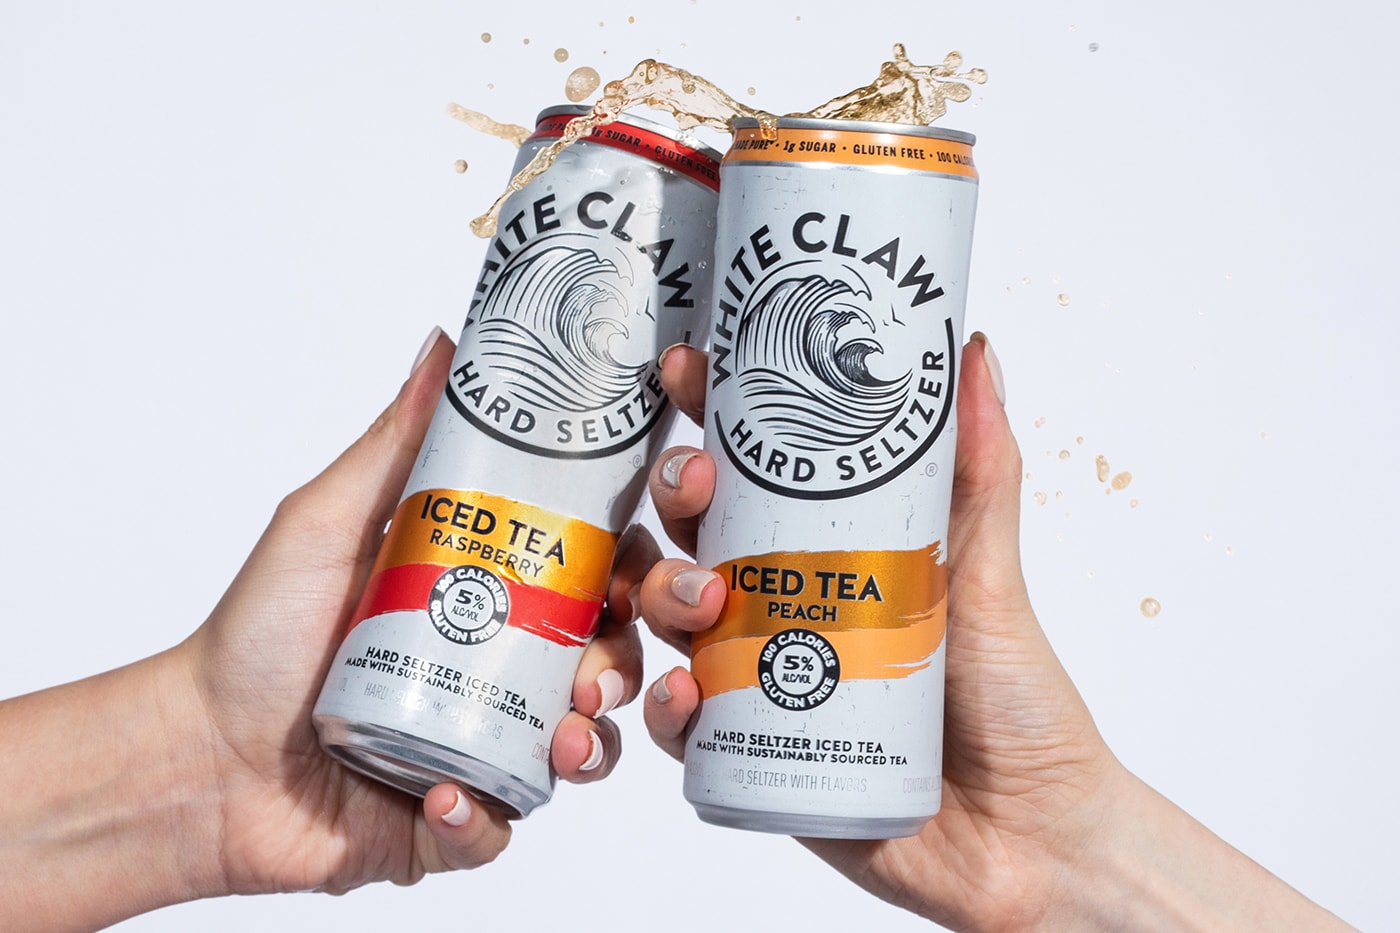 United Airlines Serve White Claw New In-Flight Menu Info